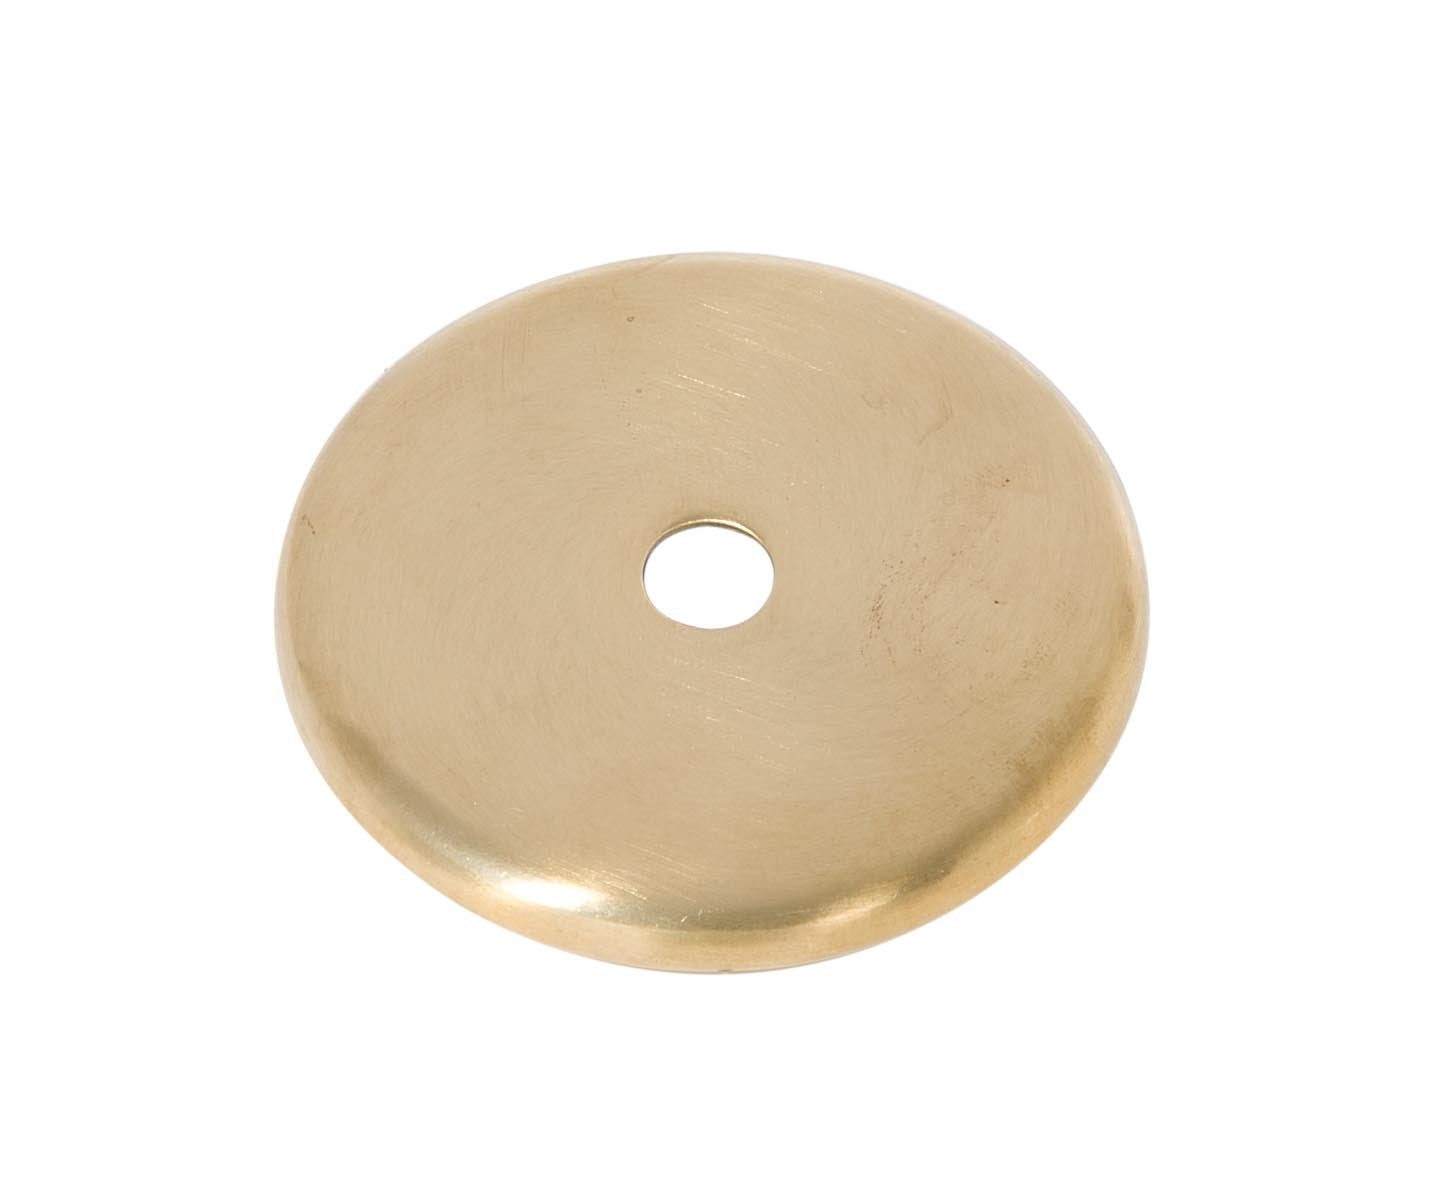 Satin Brass w/Lacquer Heavy Gauge Rolled Edge Check Plate, Slips 1/8 IP, Choice of Dia.